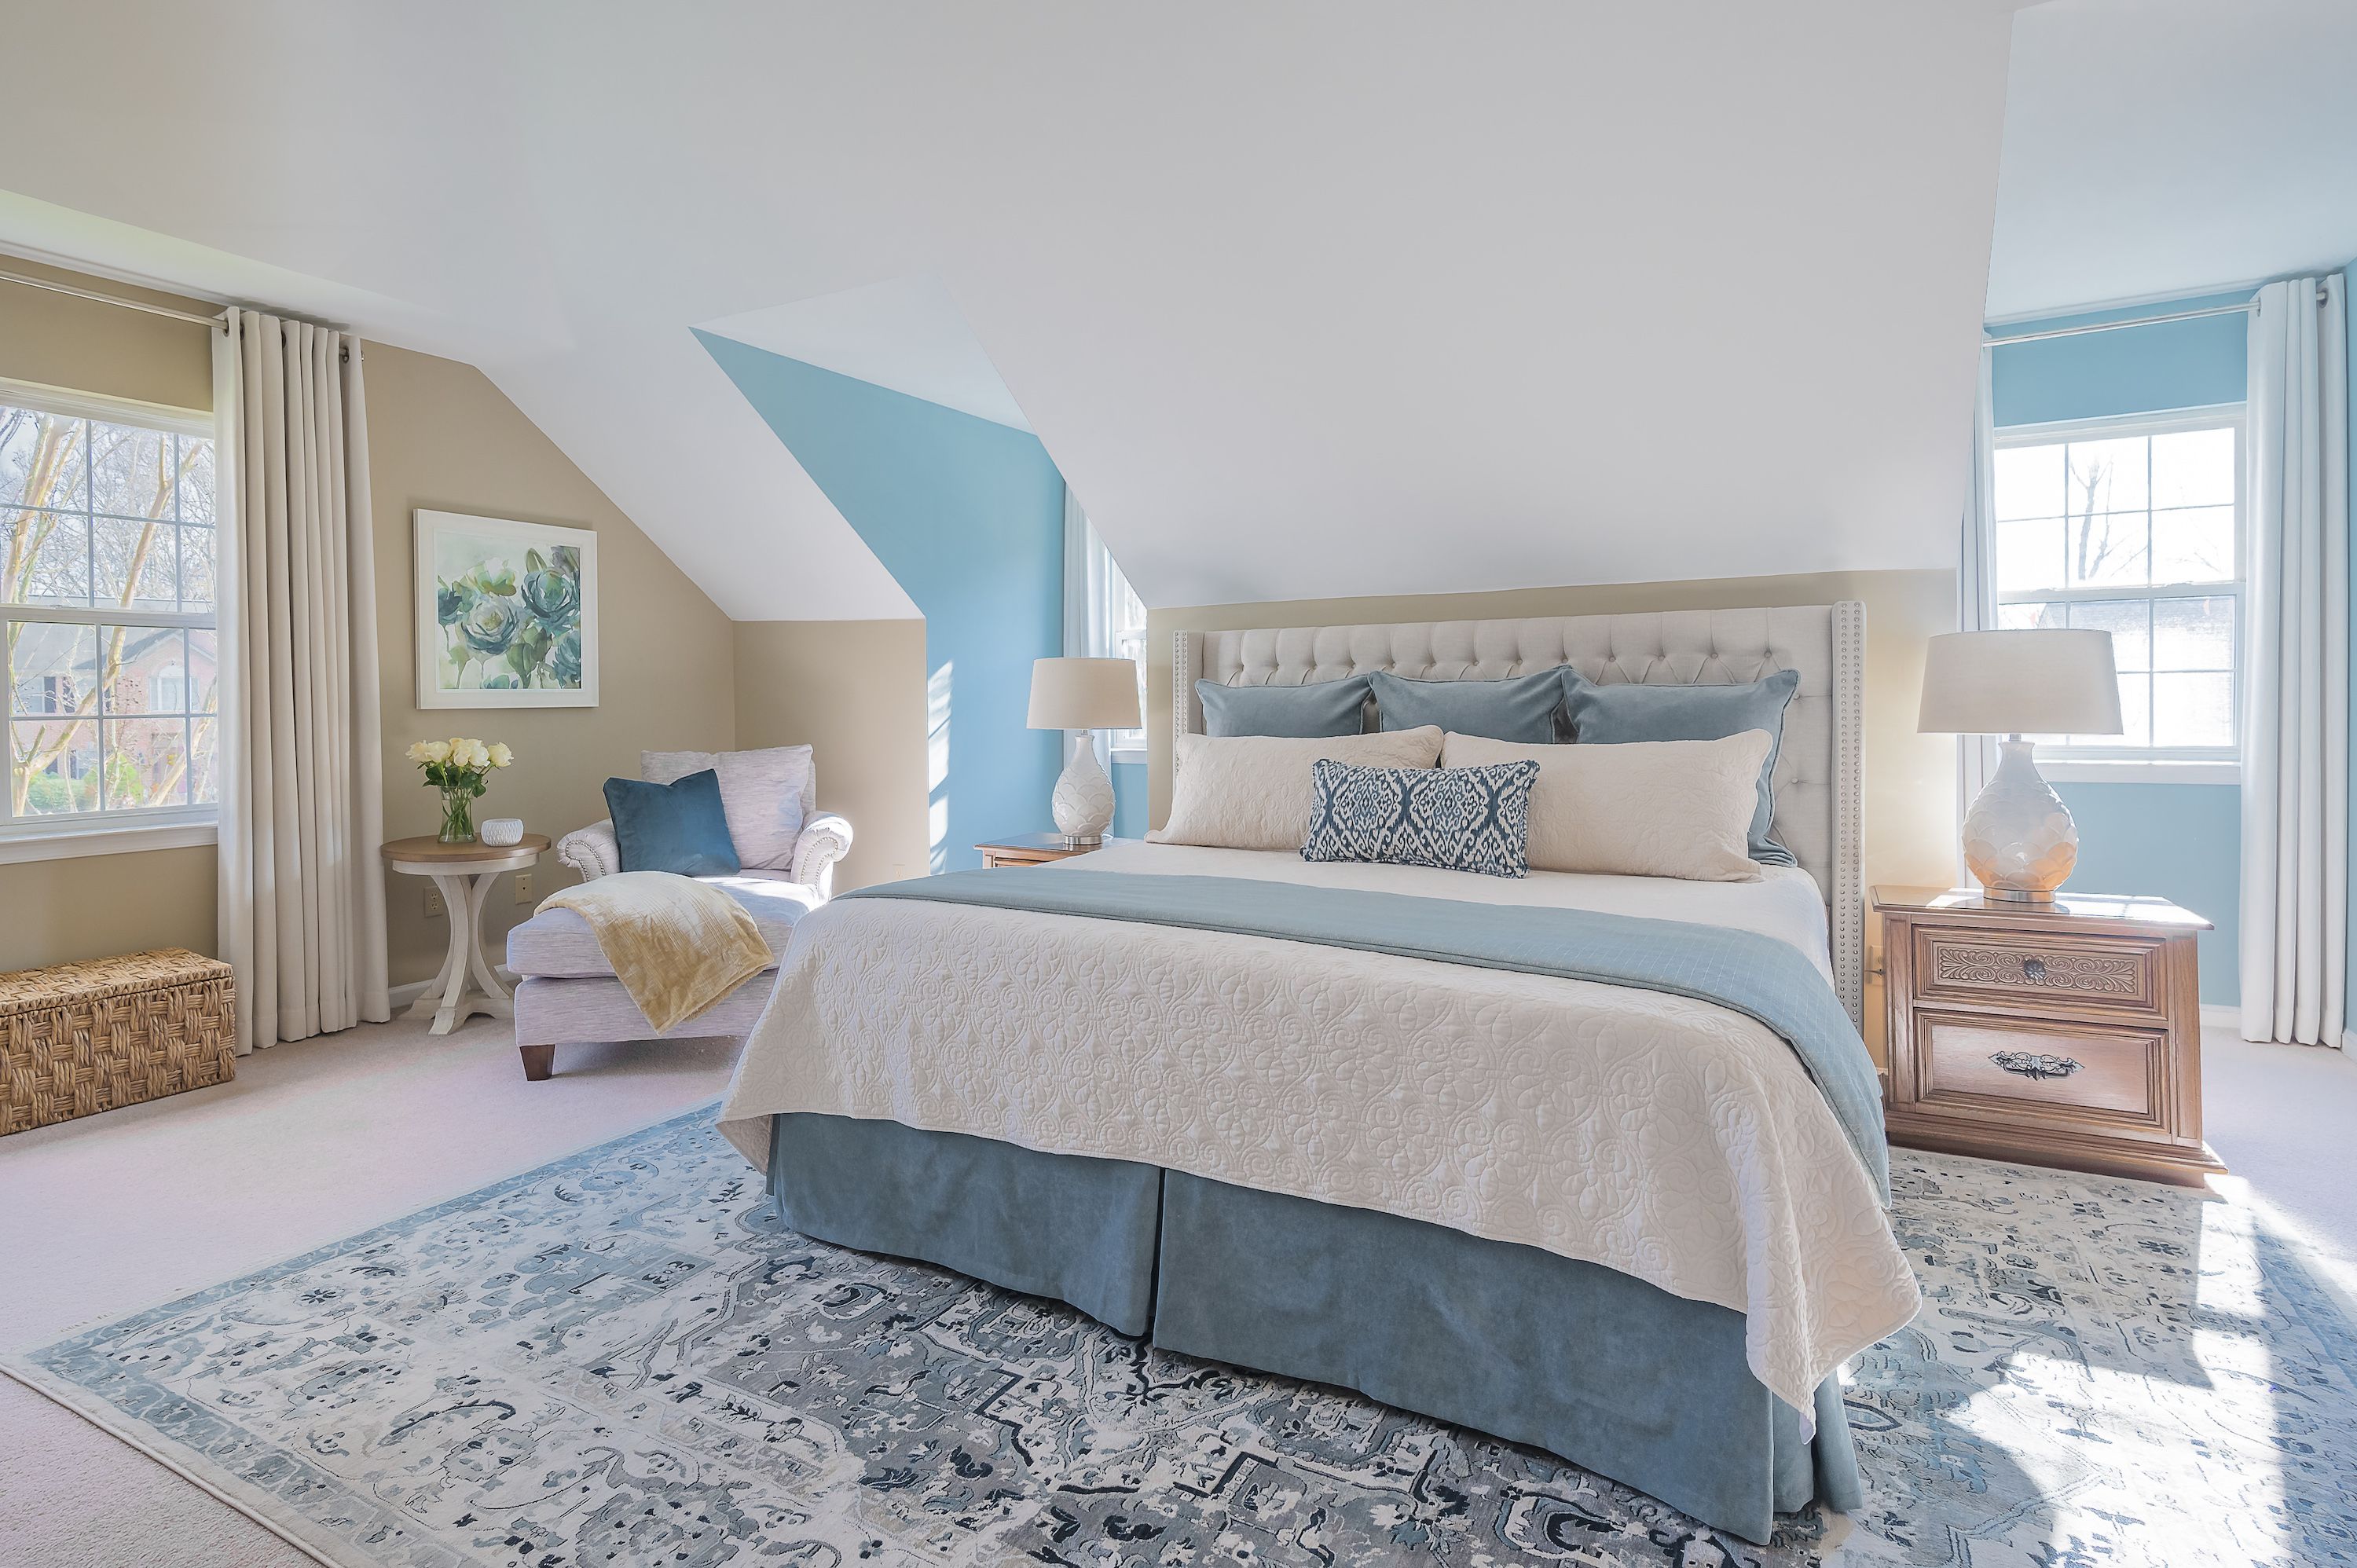 7 Ways to Keep Your Bedroom Comfortably Cool This Summer - The New